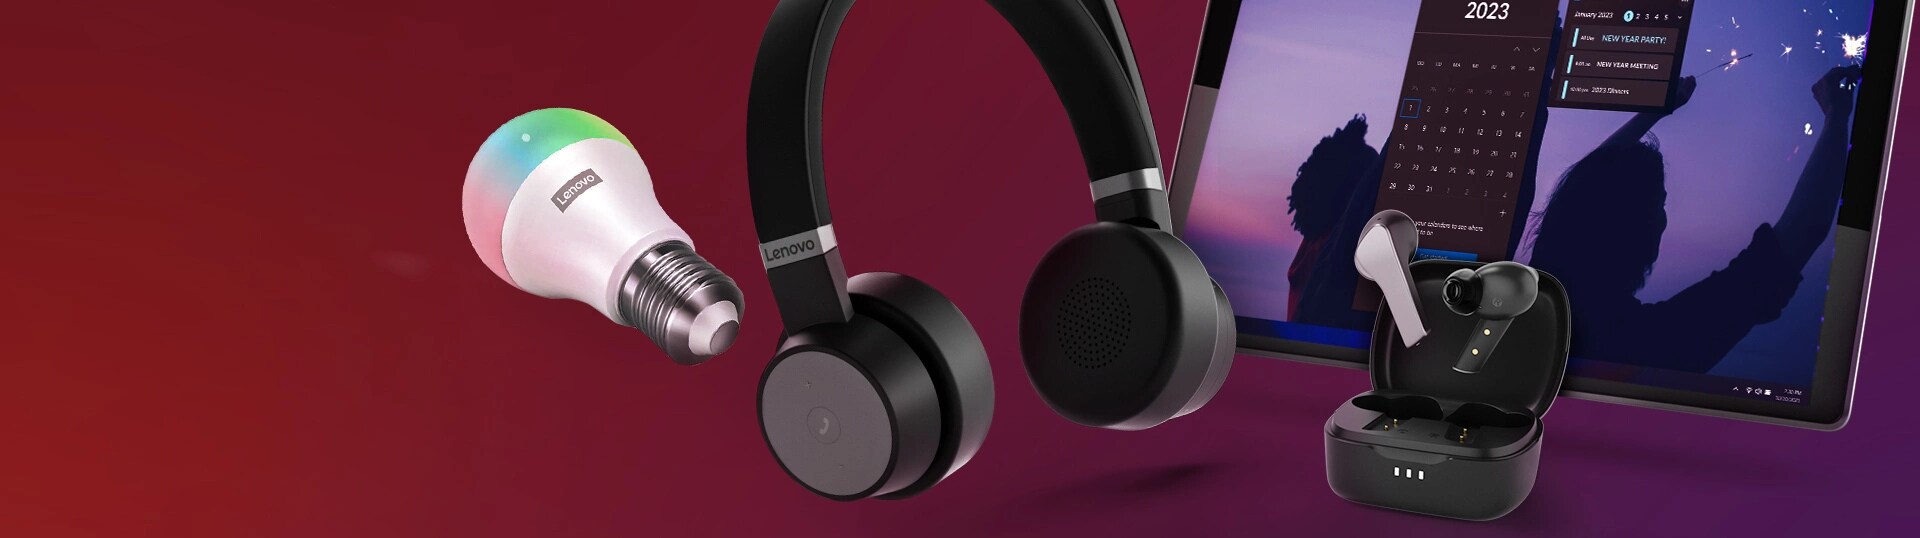 A set of Lenovo products: a Lenovo SmartBulb Gen 2, Lenovo Headset, Lenovo Wireless Earbuds, and a Lenovo Tablet. All in a purple background. 